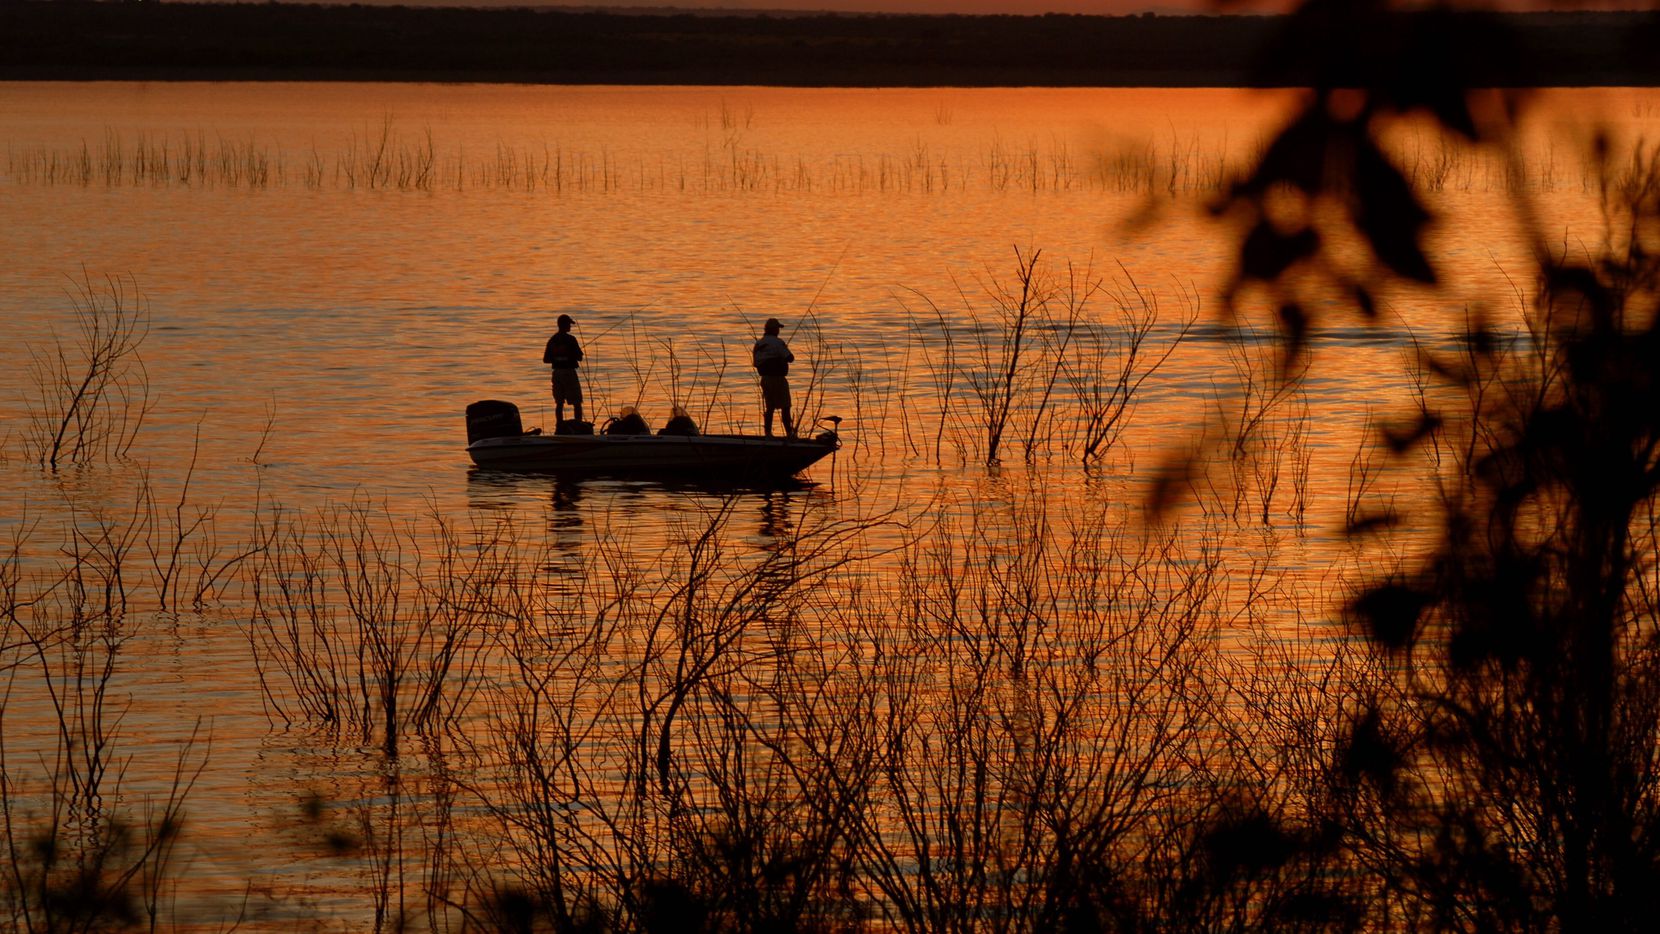 New hunting/fishing licenses valid for fiscal year 2021-22 go on sale on Aug. 15 through nearly 2,000 vendors around the state. Most current licenses will expire at midnight Aug. 31. Licenses are available to suit just about every need. The best deal going for all-around sportsmen is the $68 Super Combo.